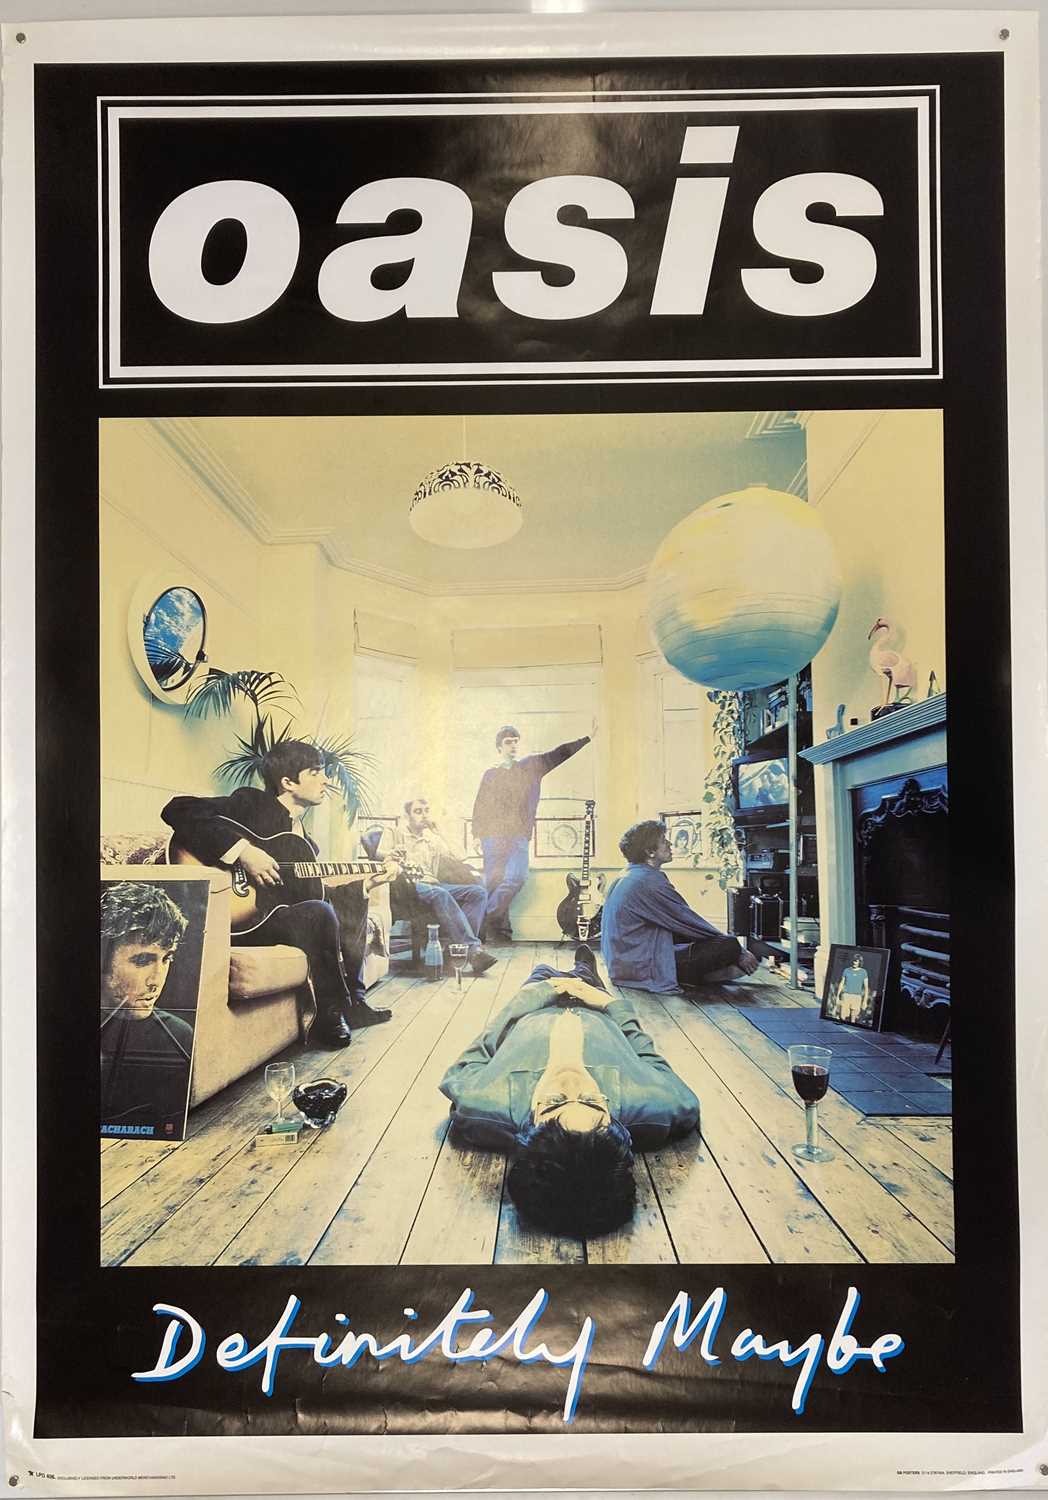 Lot 405 - OASIS DEFINITELY MAYBE POSTER